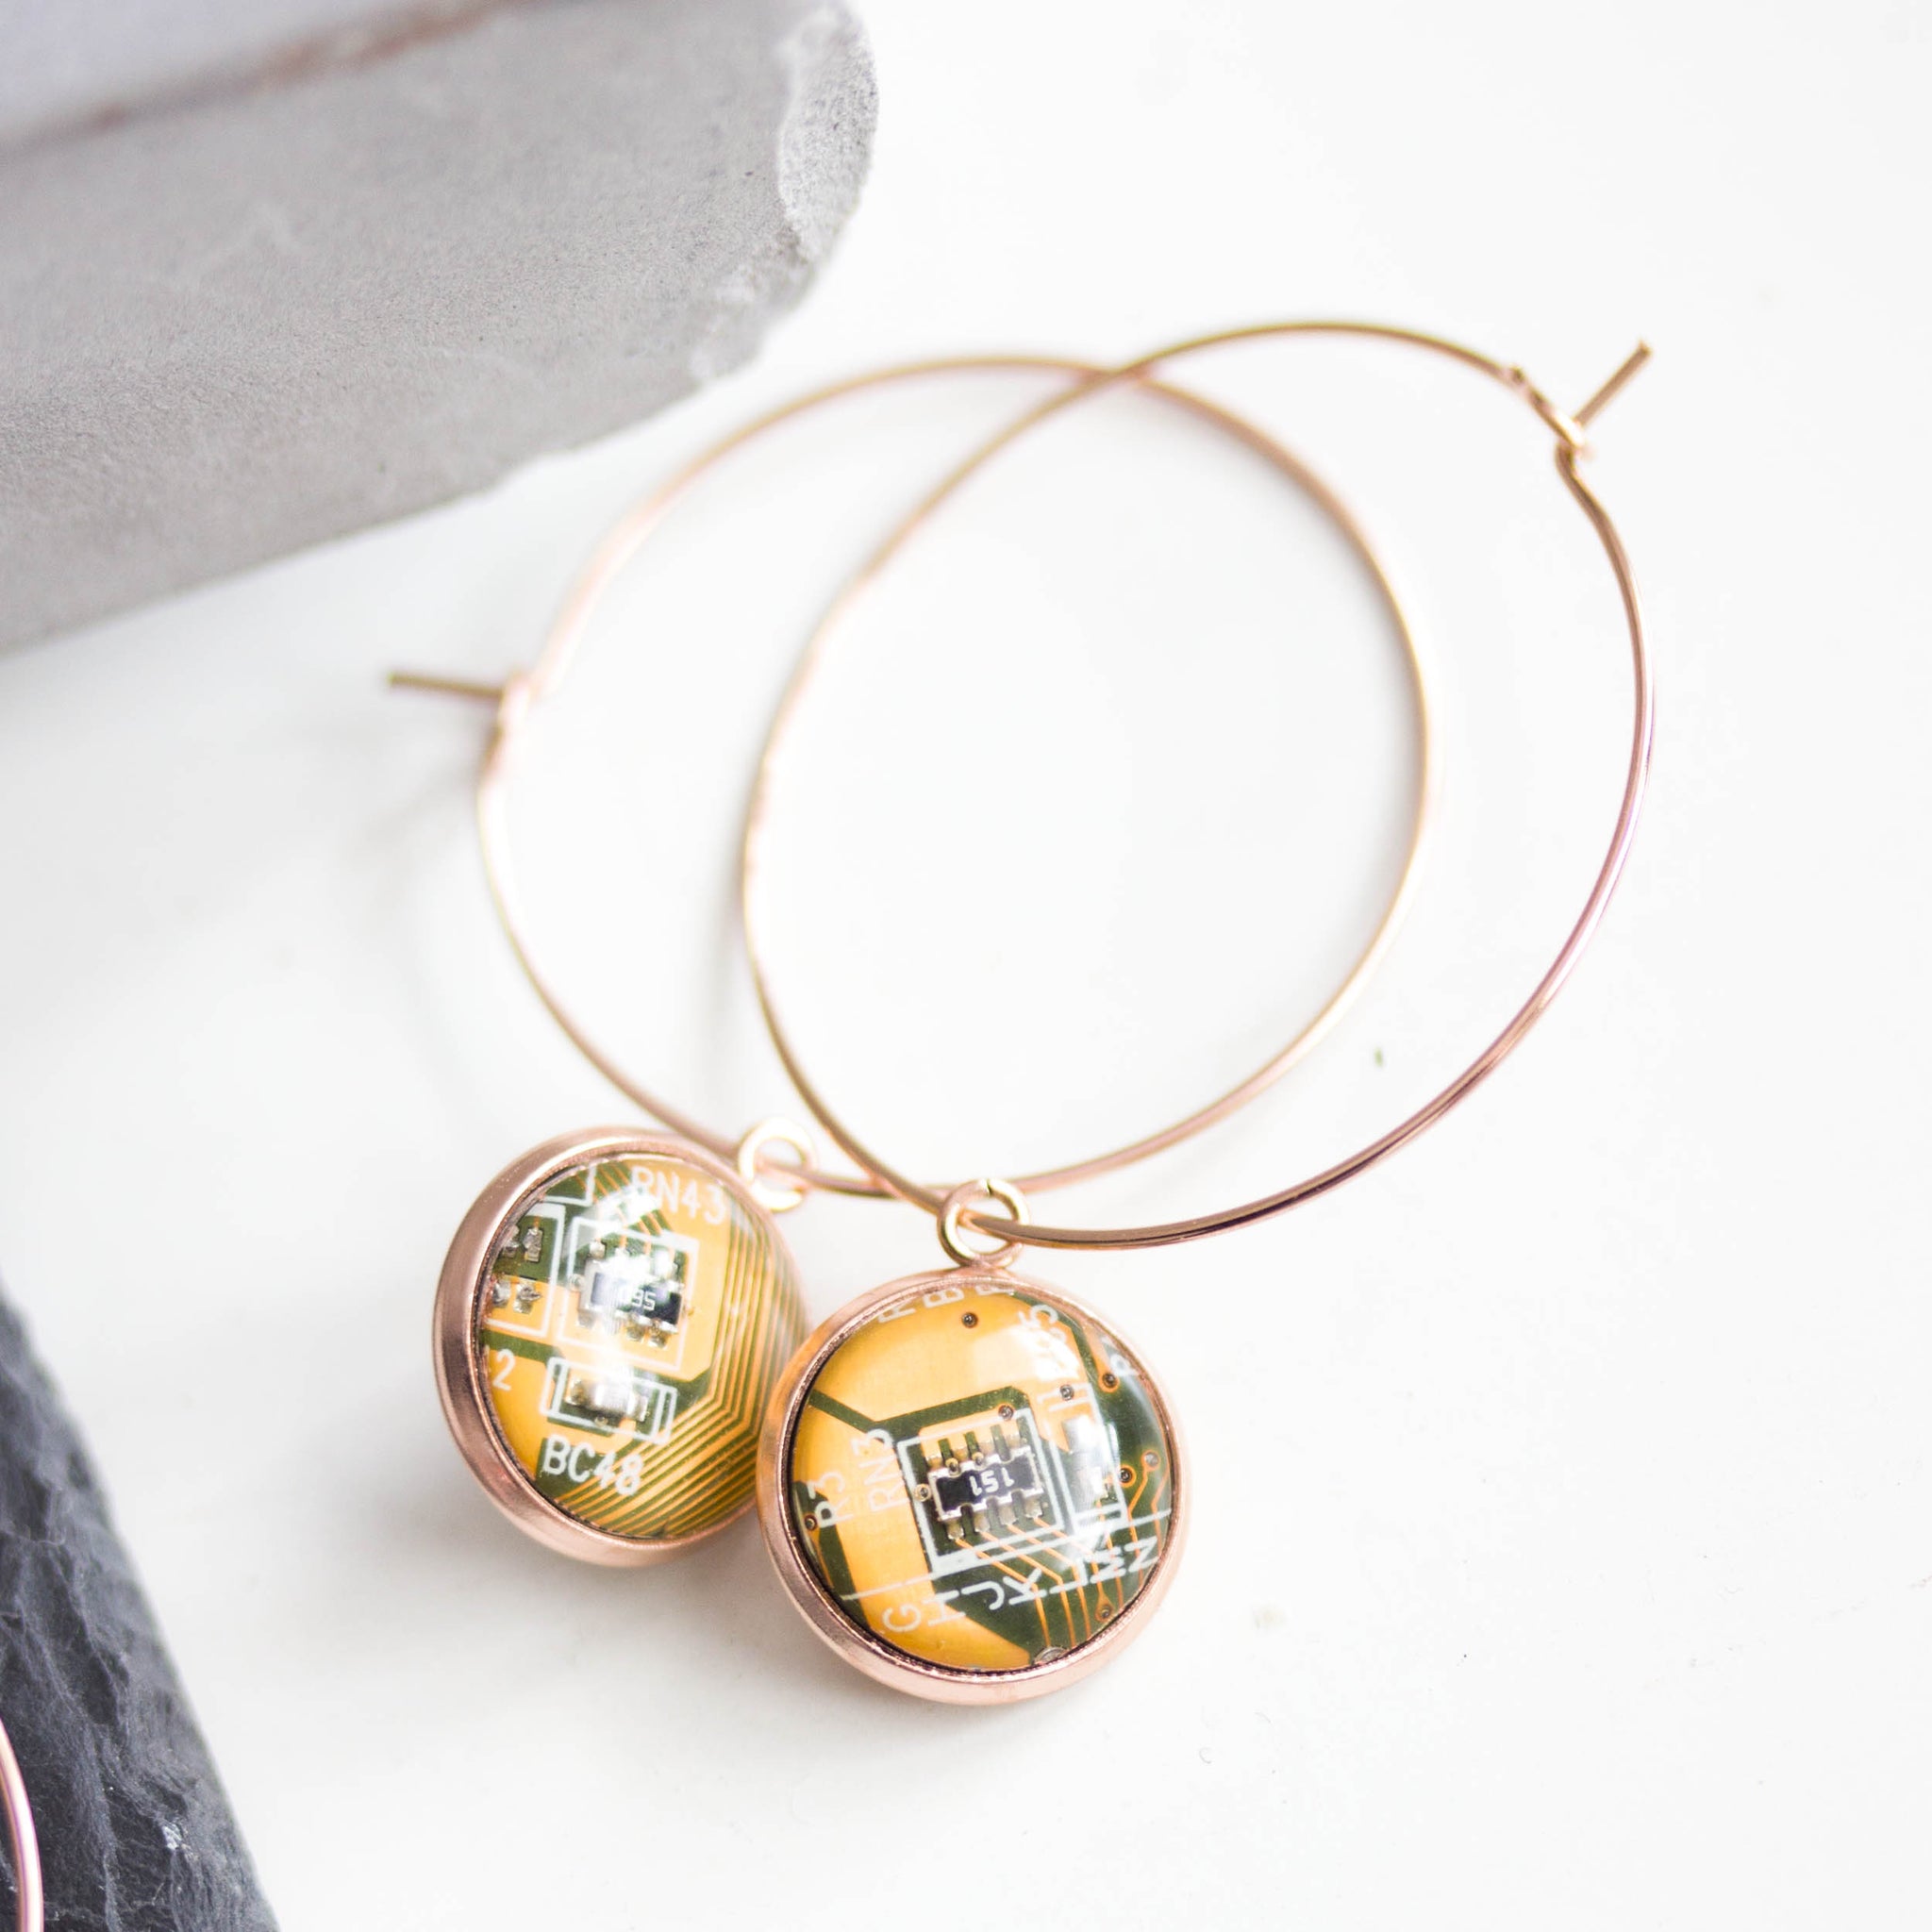 Hoop earrings with 12mm round circuit board pendants, rose gold colored wires